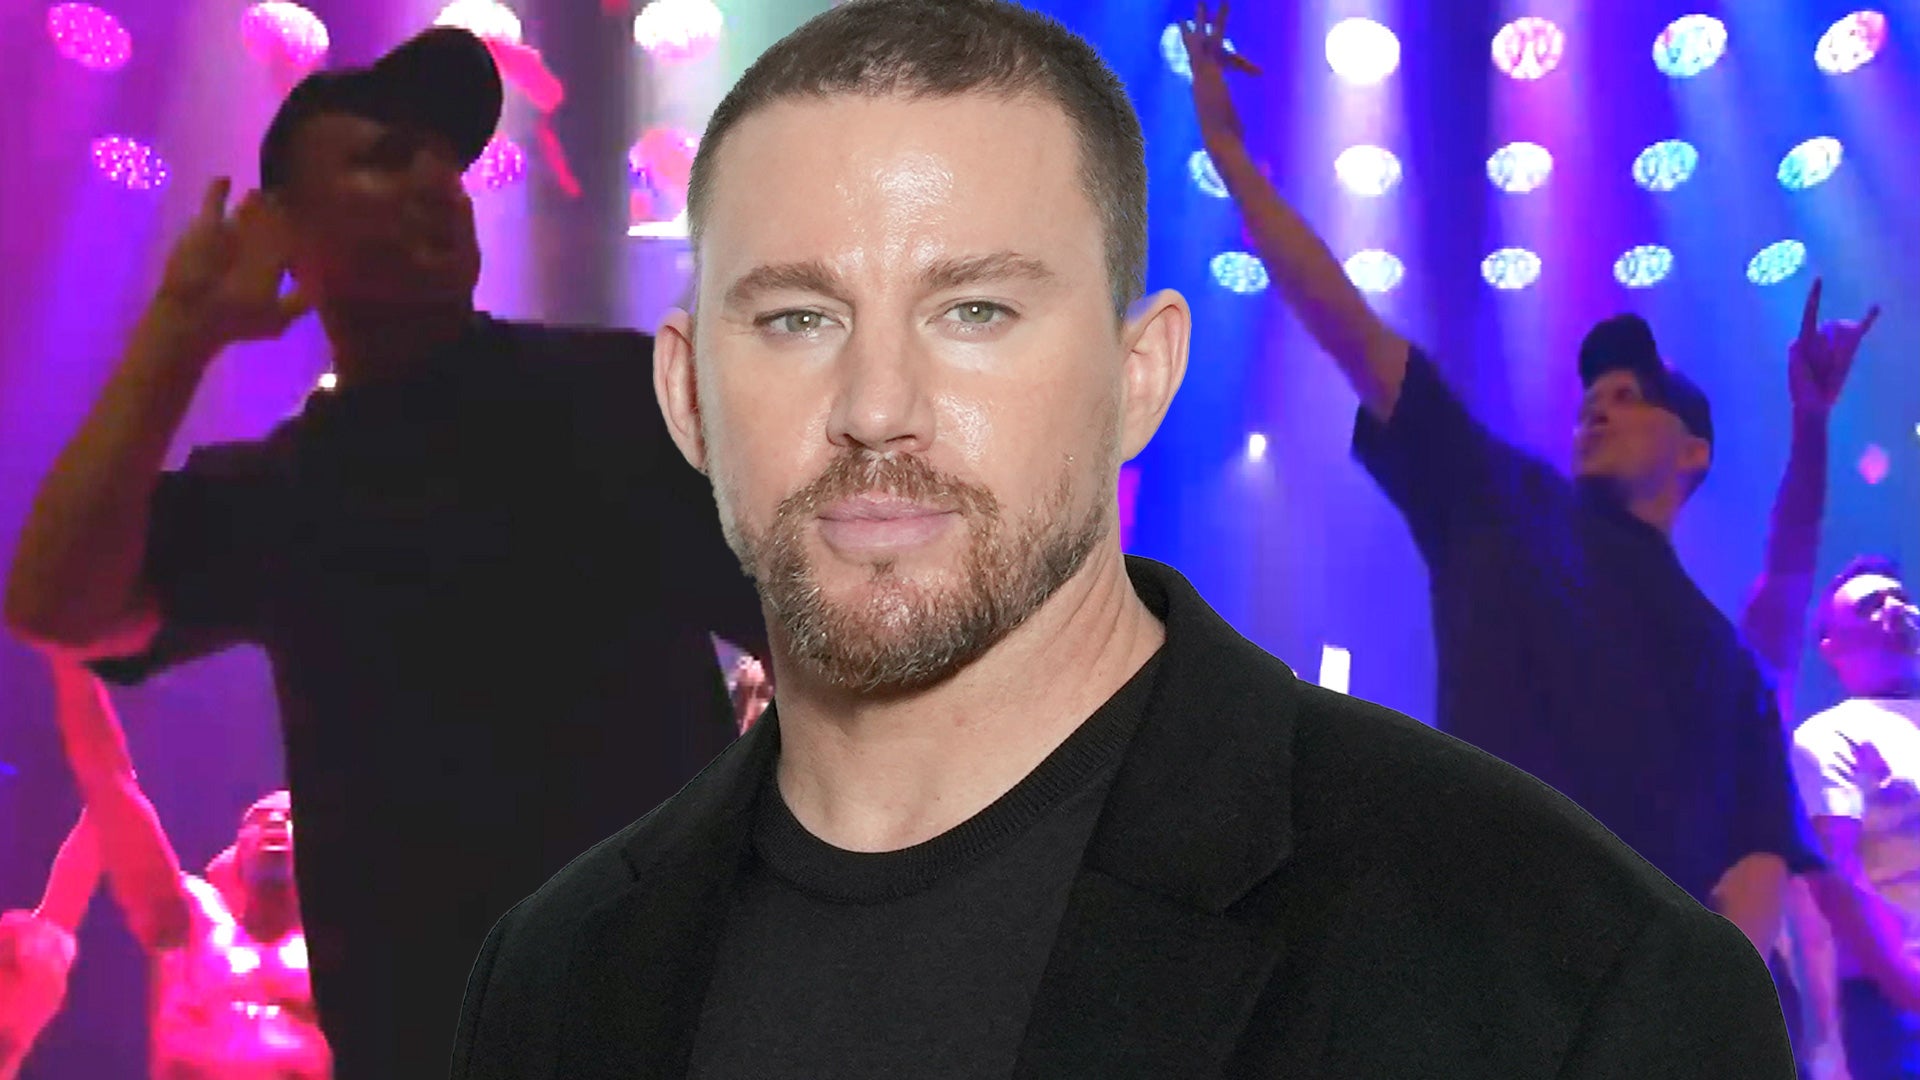 Channing Tatum Pulls Out 'Step Up' Dance Moves for Surprise 'Magic Mike Live' Appearance